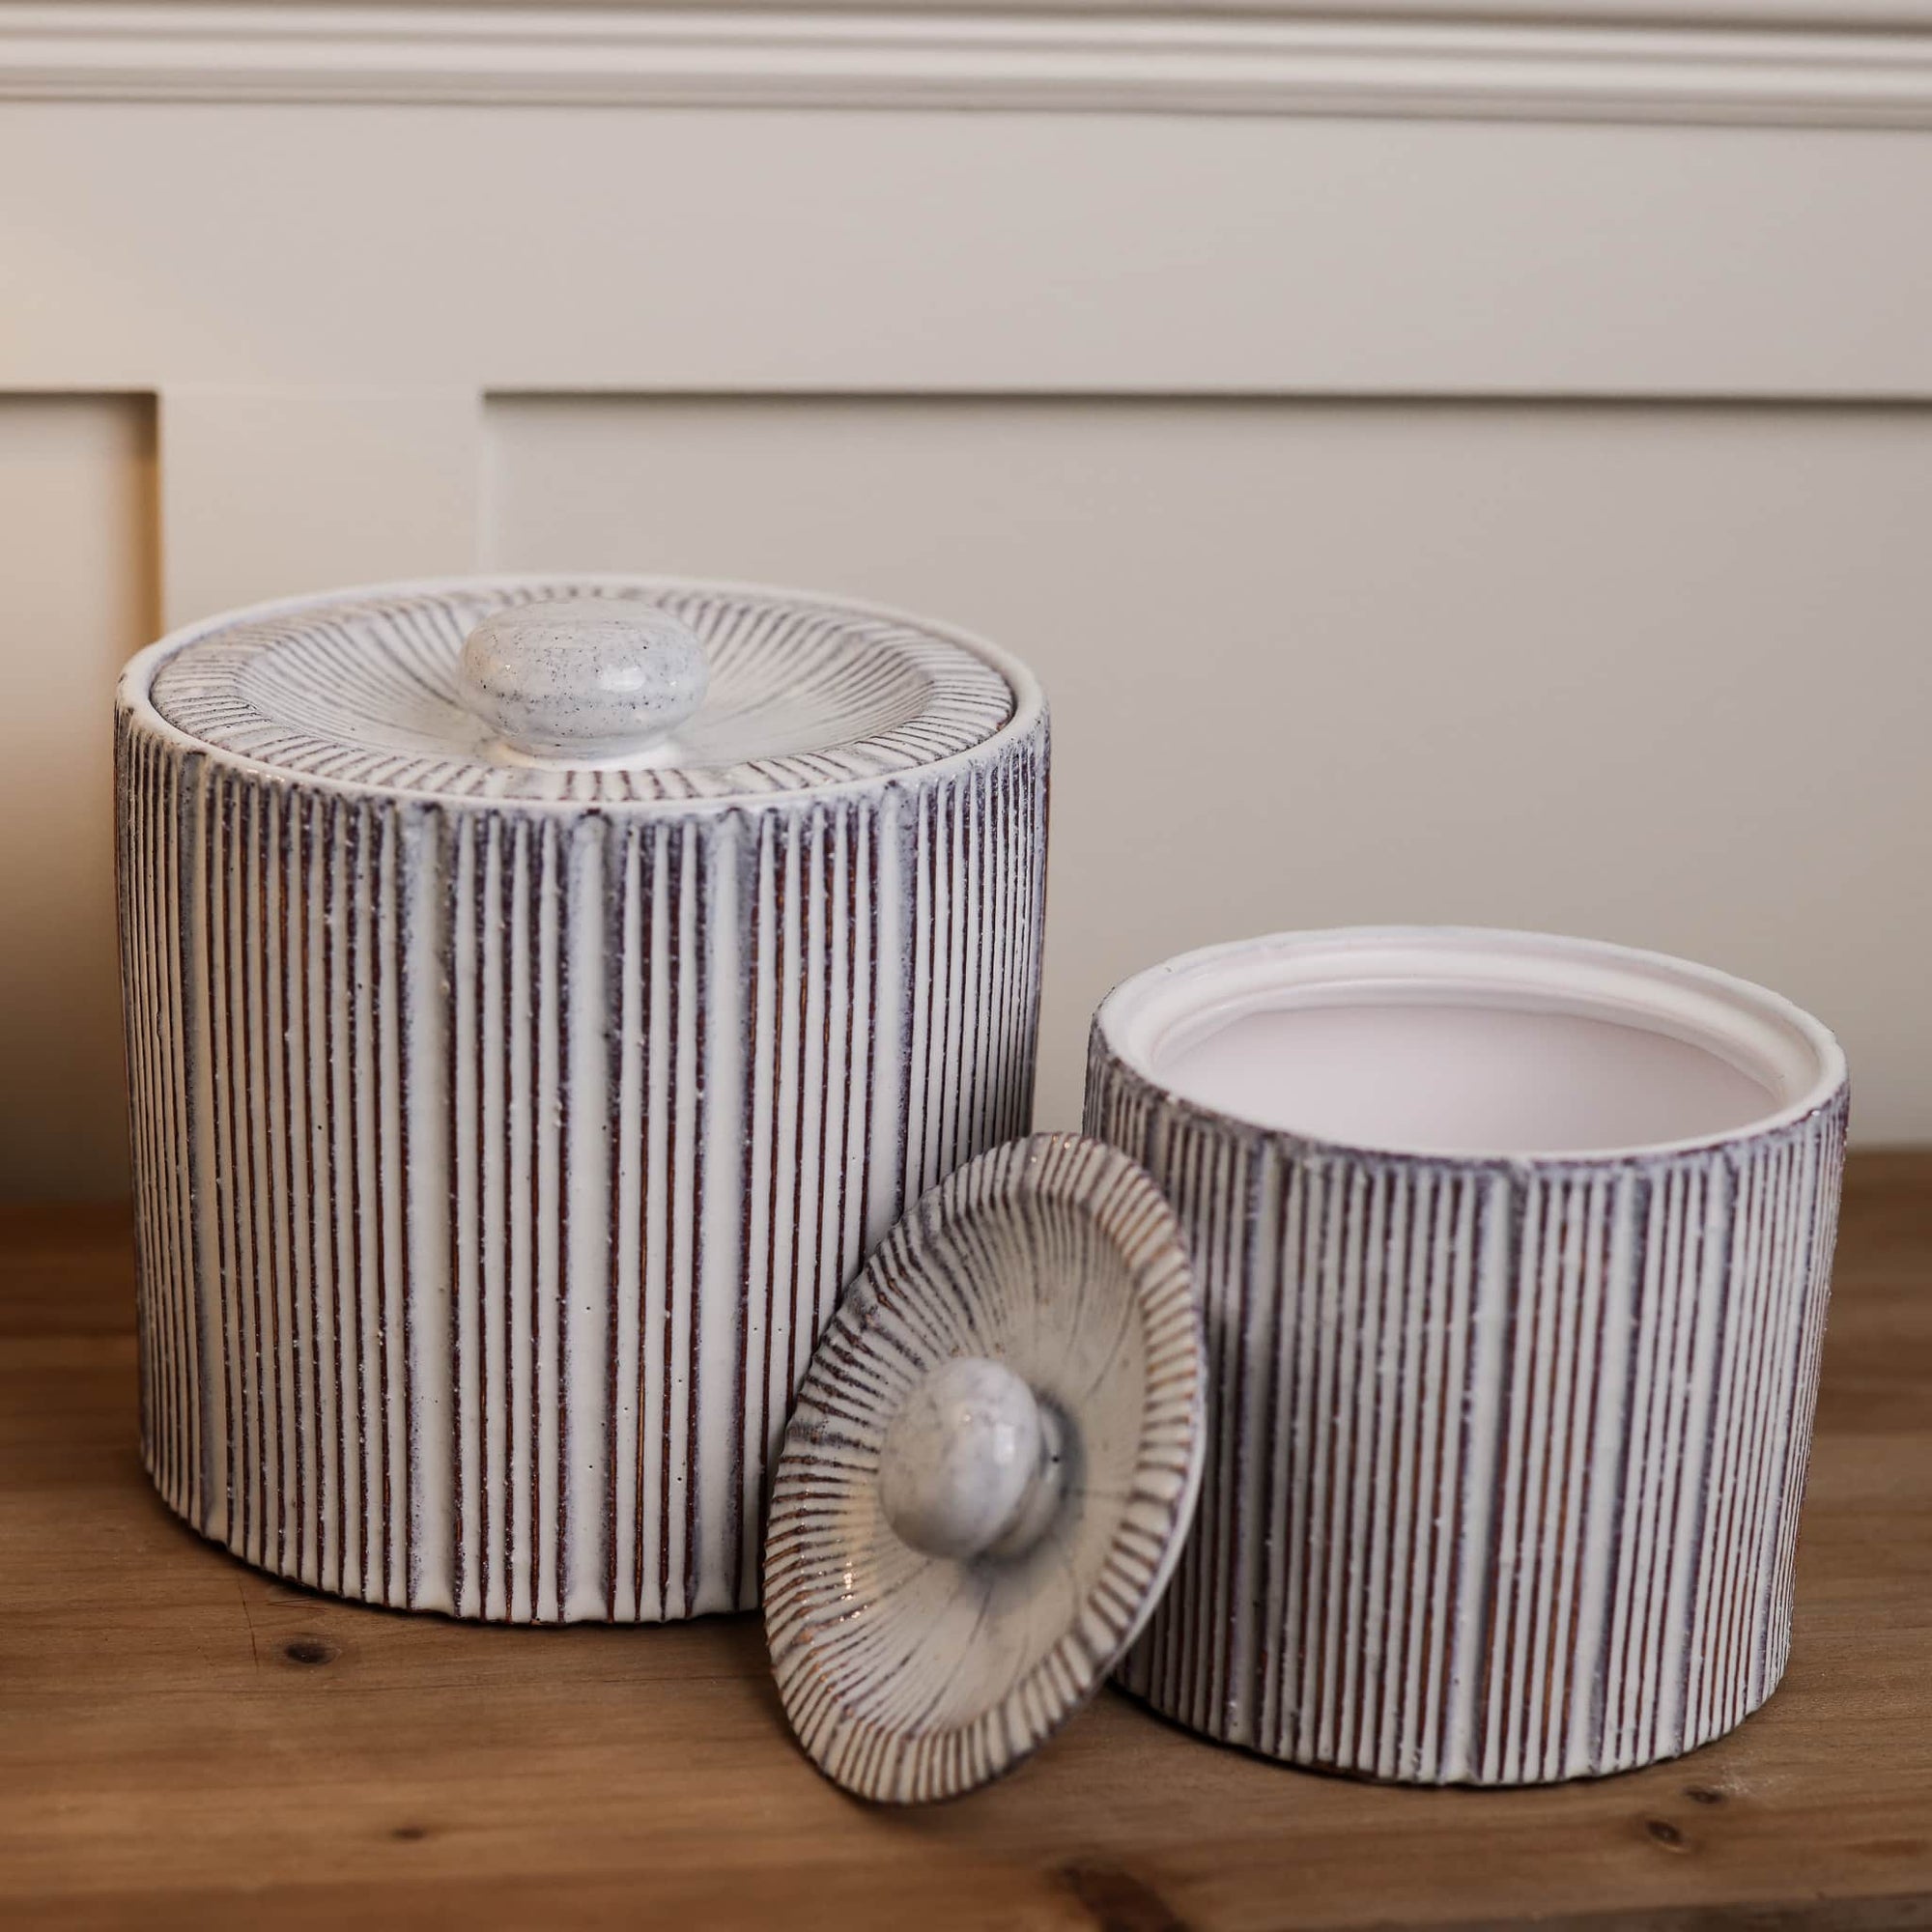 Decorative ceramic storage jars with red and white striped ridge and lid with small handle, on wooden console with lid off on smaller jar.